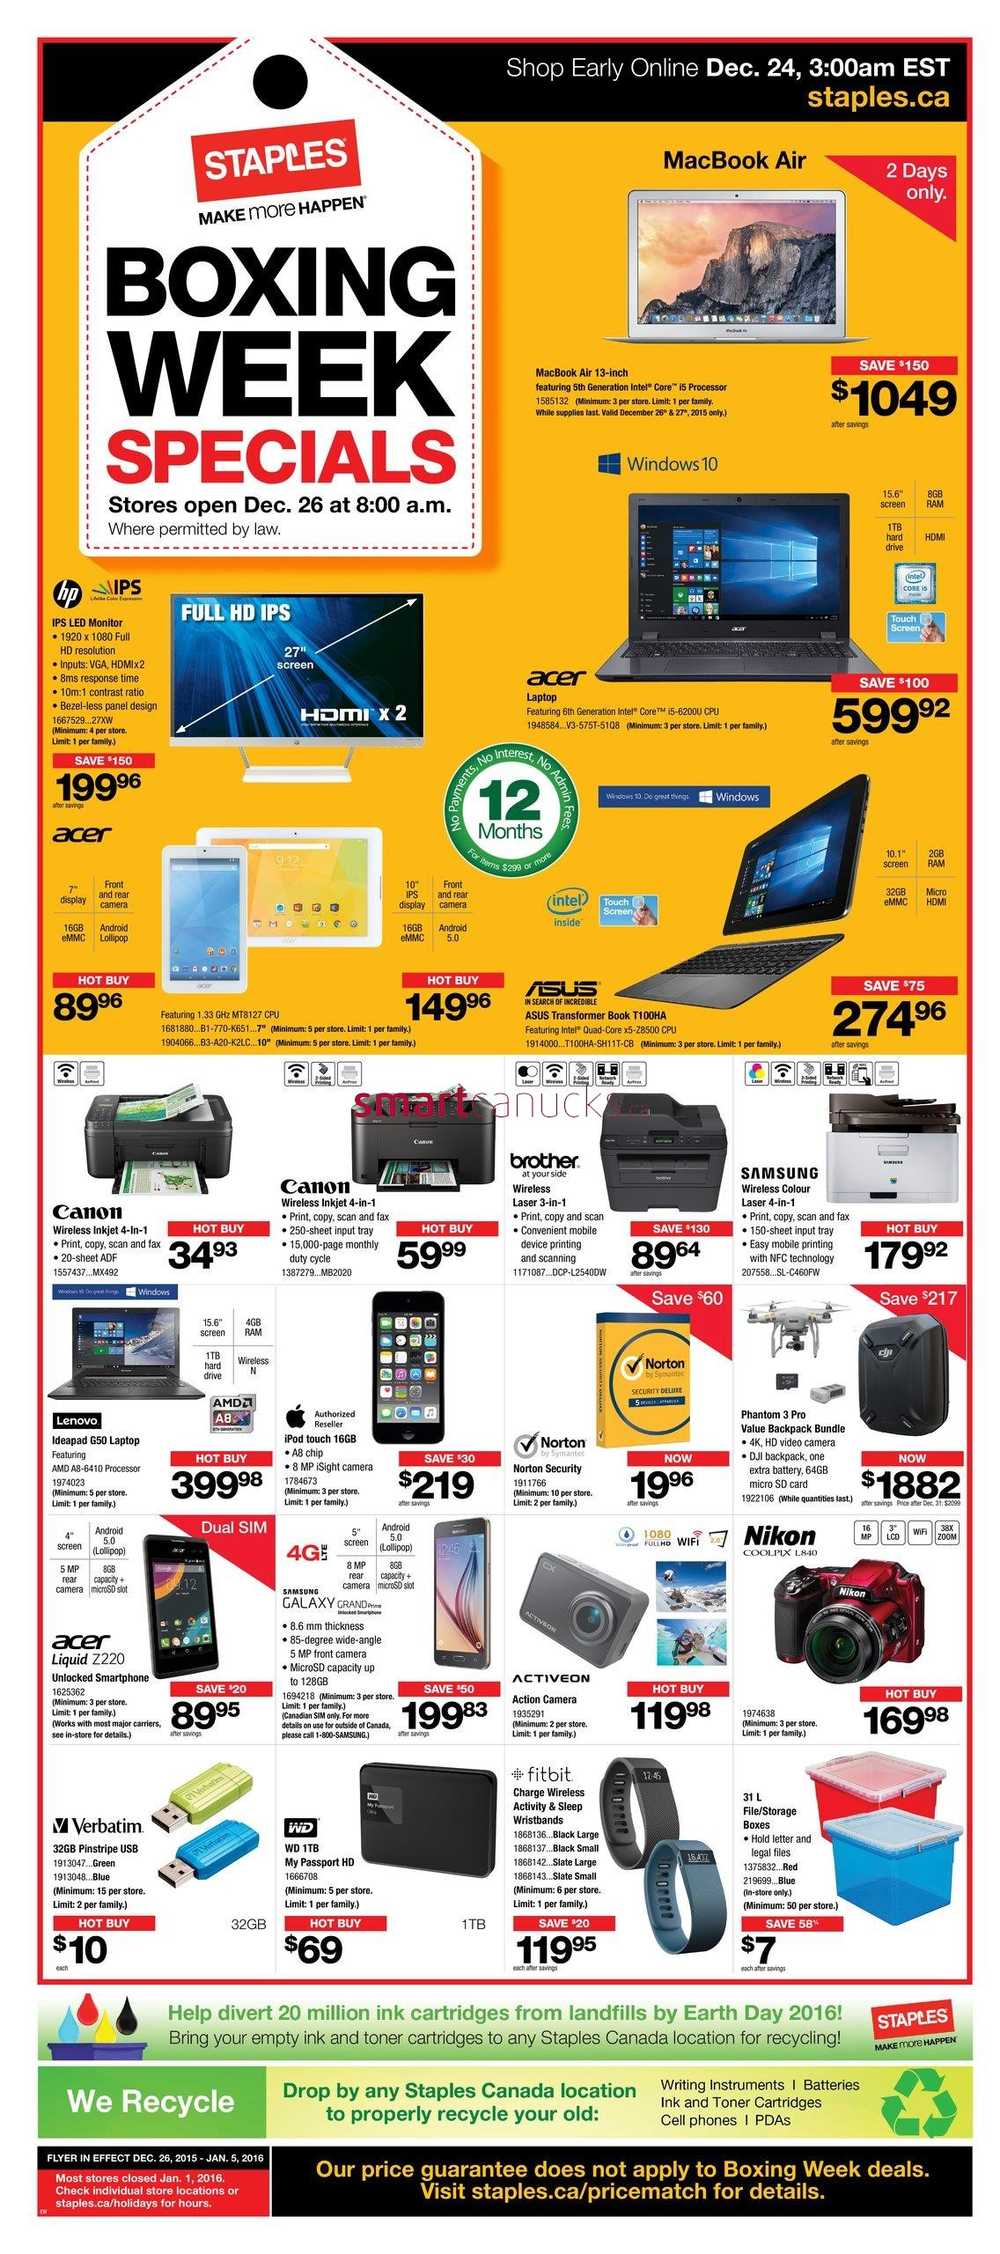 Staples Boxing Day / Boxing Week Flyer Deals December 24, 2015